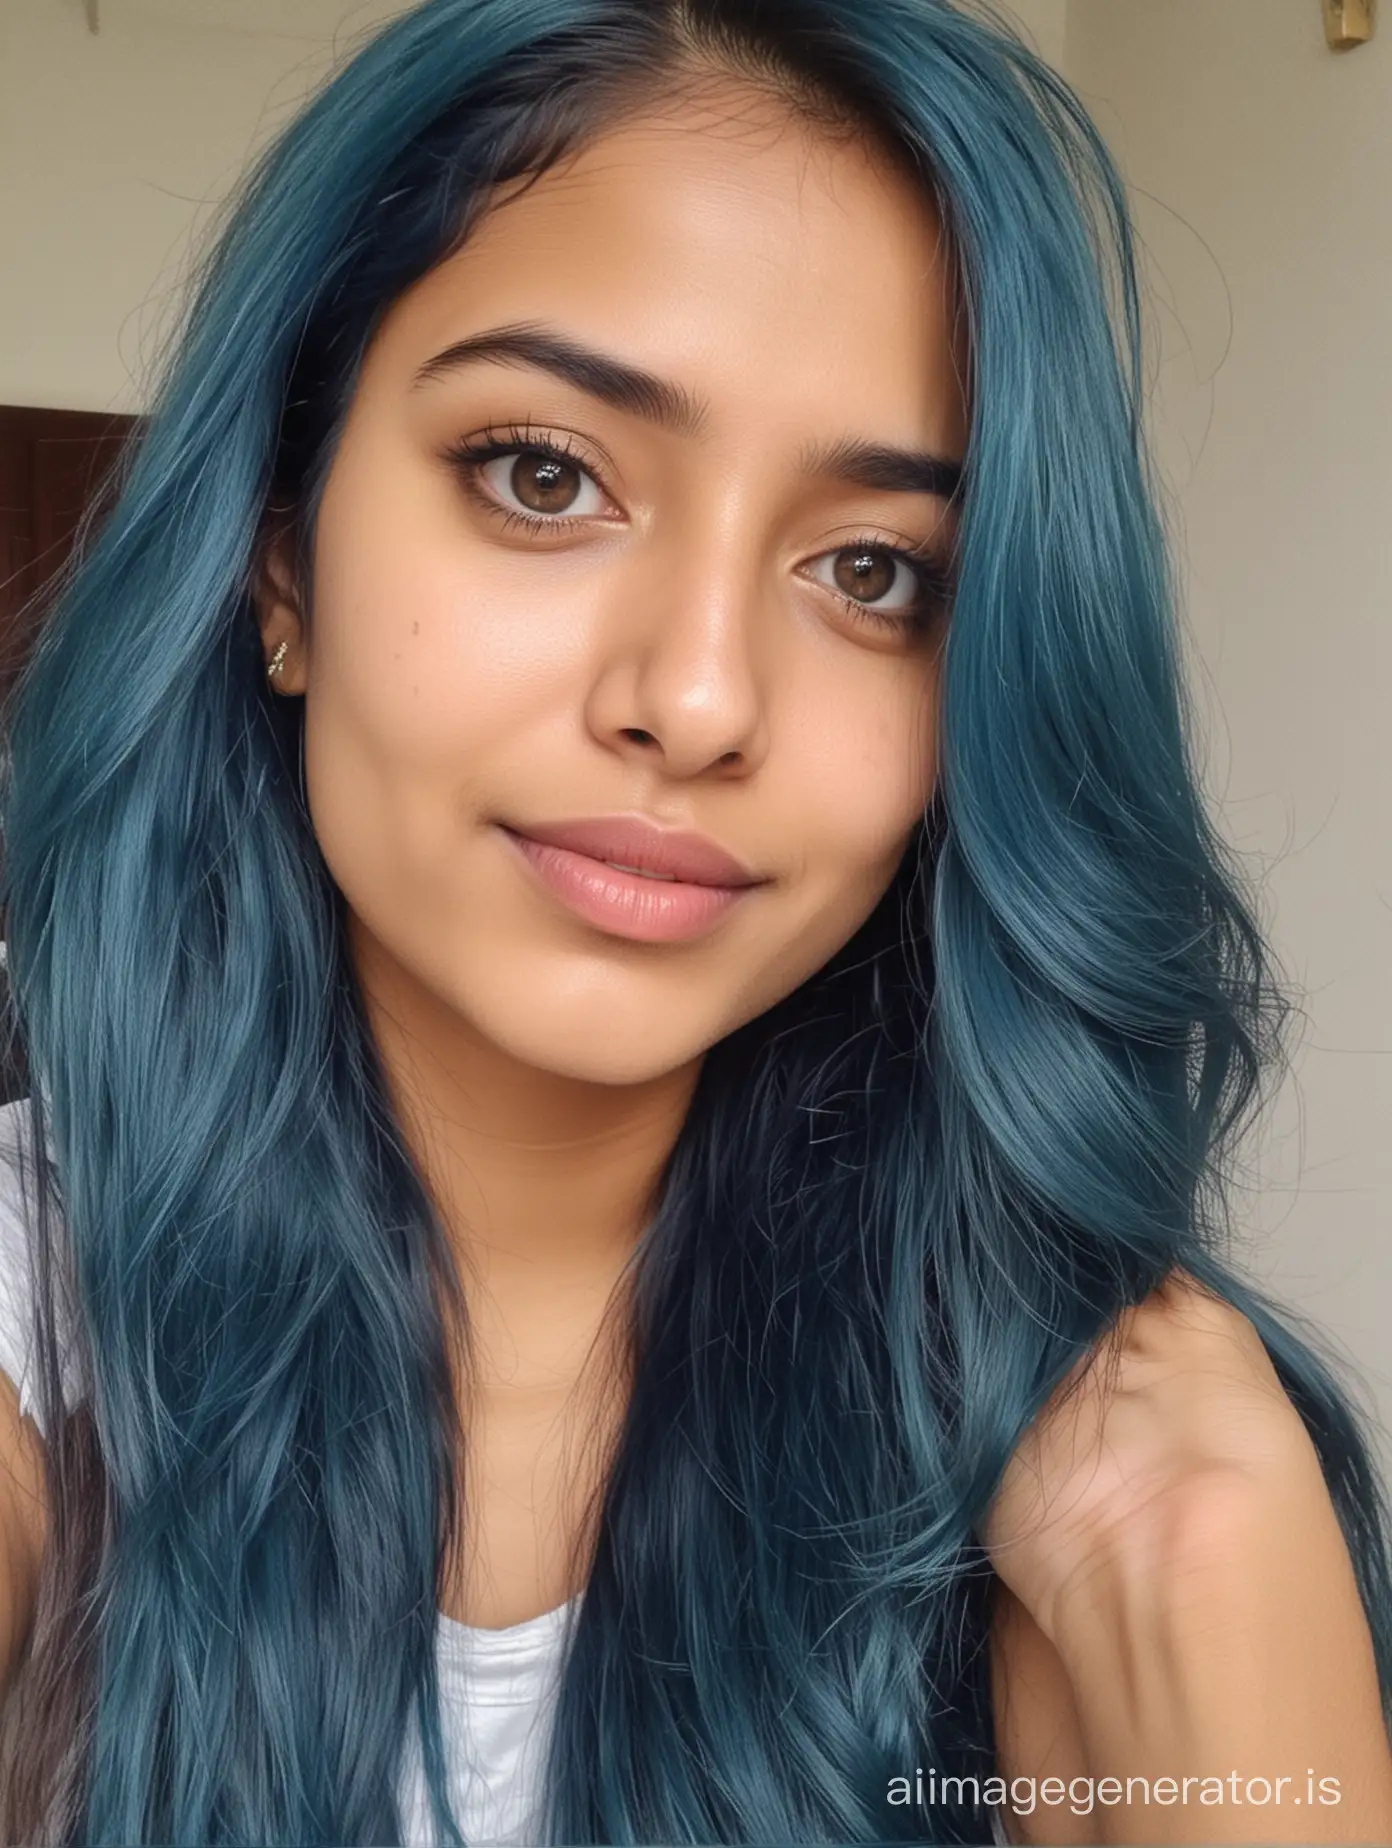 Portrait-of-a-Stylish-25YearOld-Kerala-Woman-with-Long-Curly-Blue-Hair